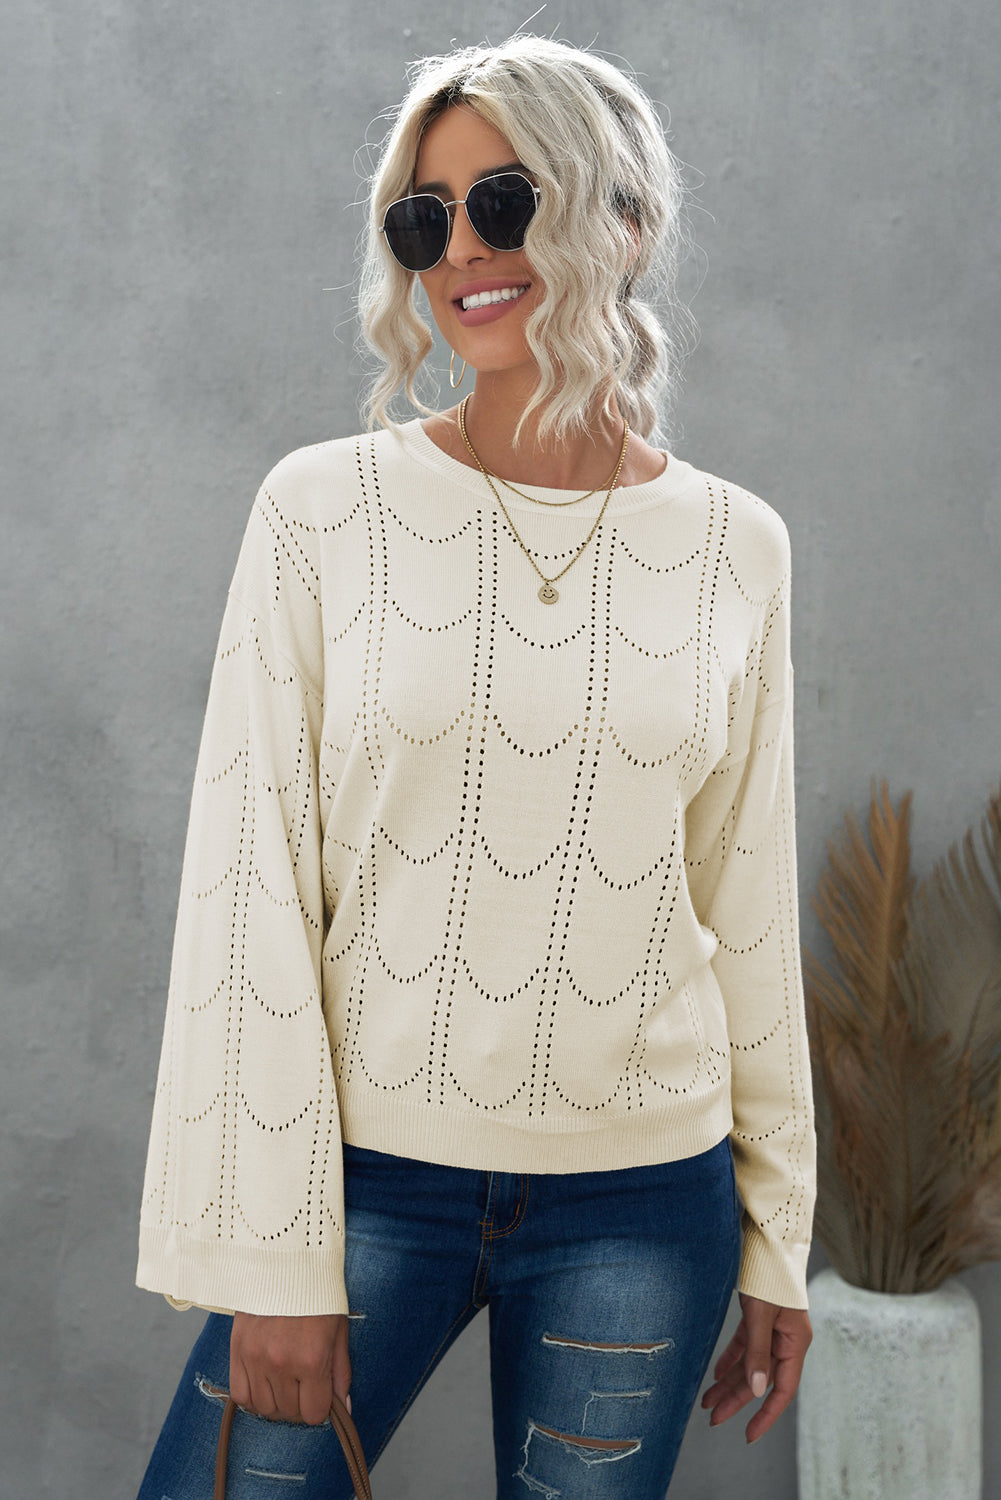 Lattice Work Pullover Sweater Top in Ivory and Caramel